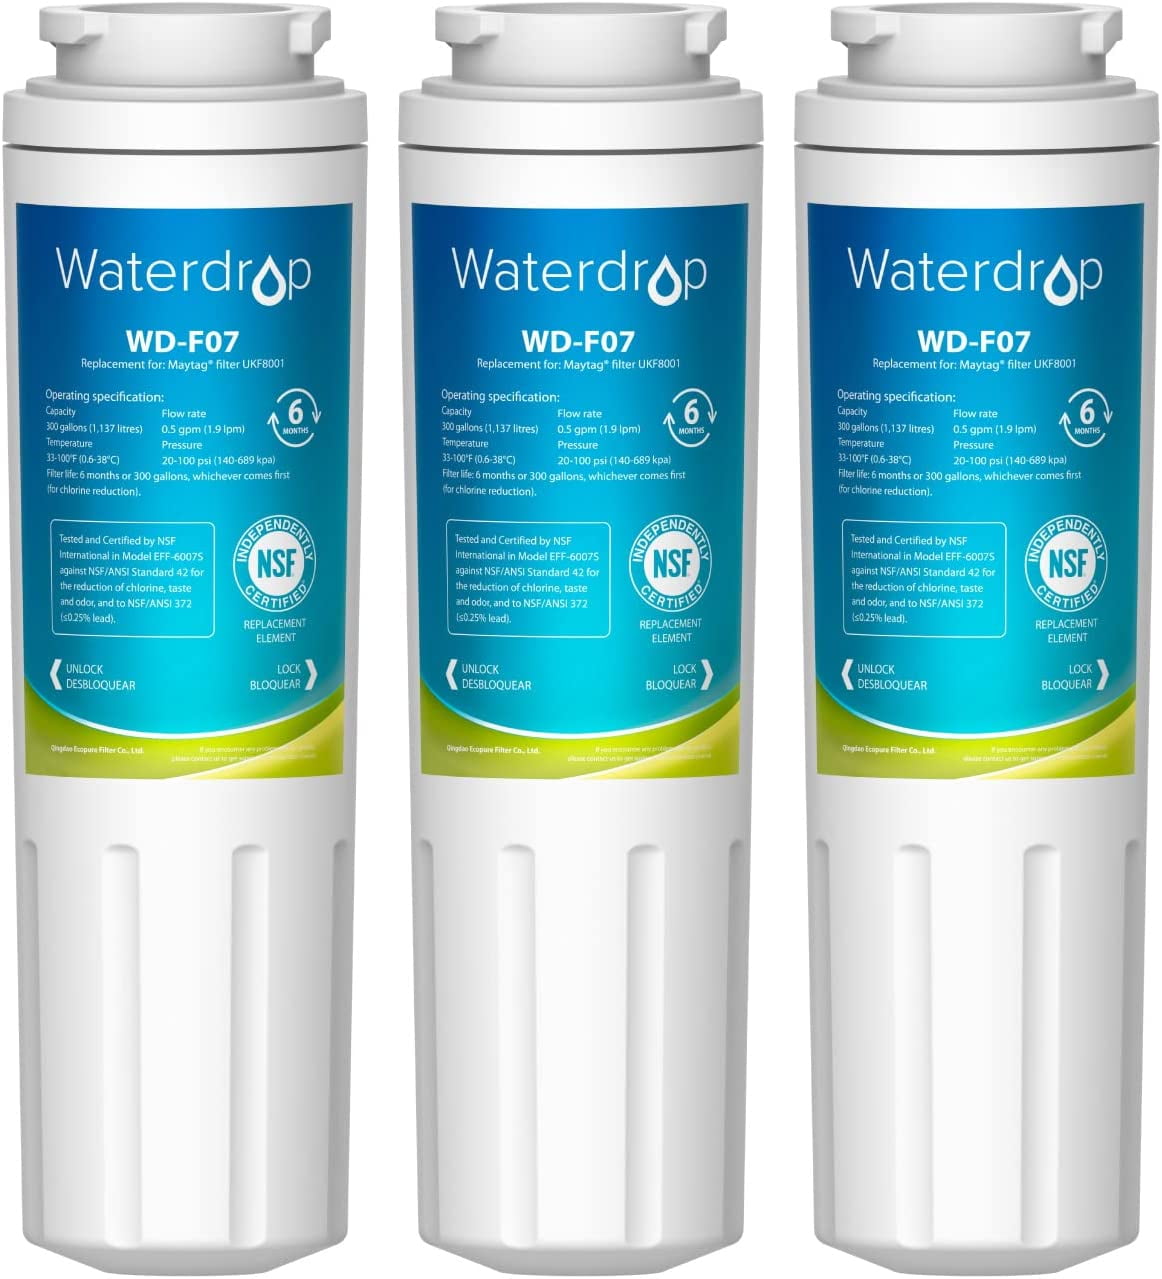 Waterdrop UKF8001 water filter, Replacement for Maytag EDR4RXD1, UKF8001,  UKF8001AXX, UKF8001P, Whirlpool 4396395, Puriclean II, 469006 Refrigerator  Water Filter, Pack of 3 